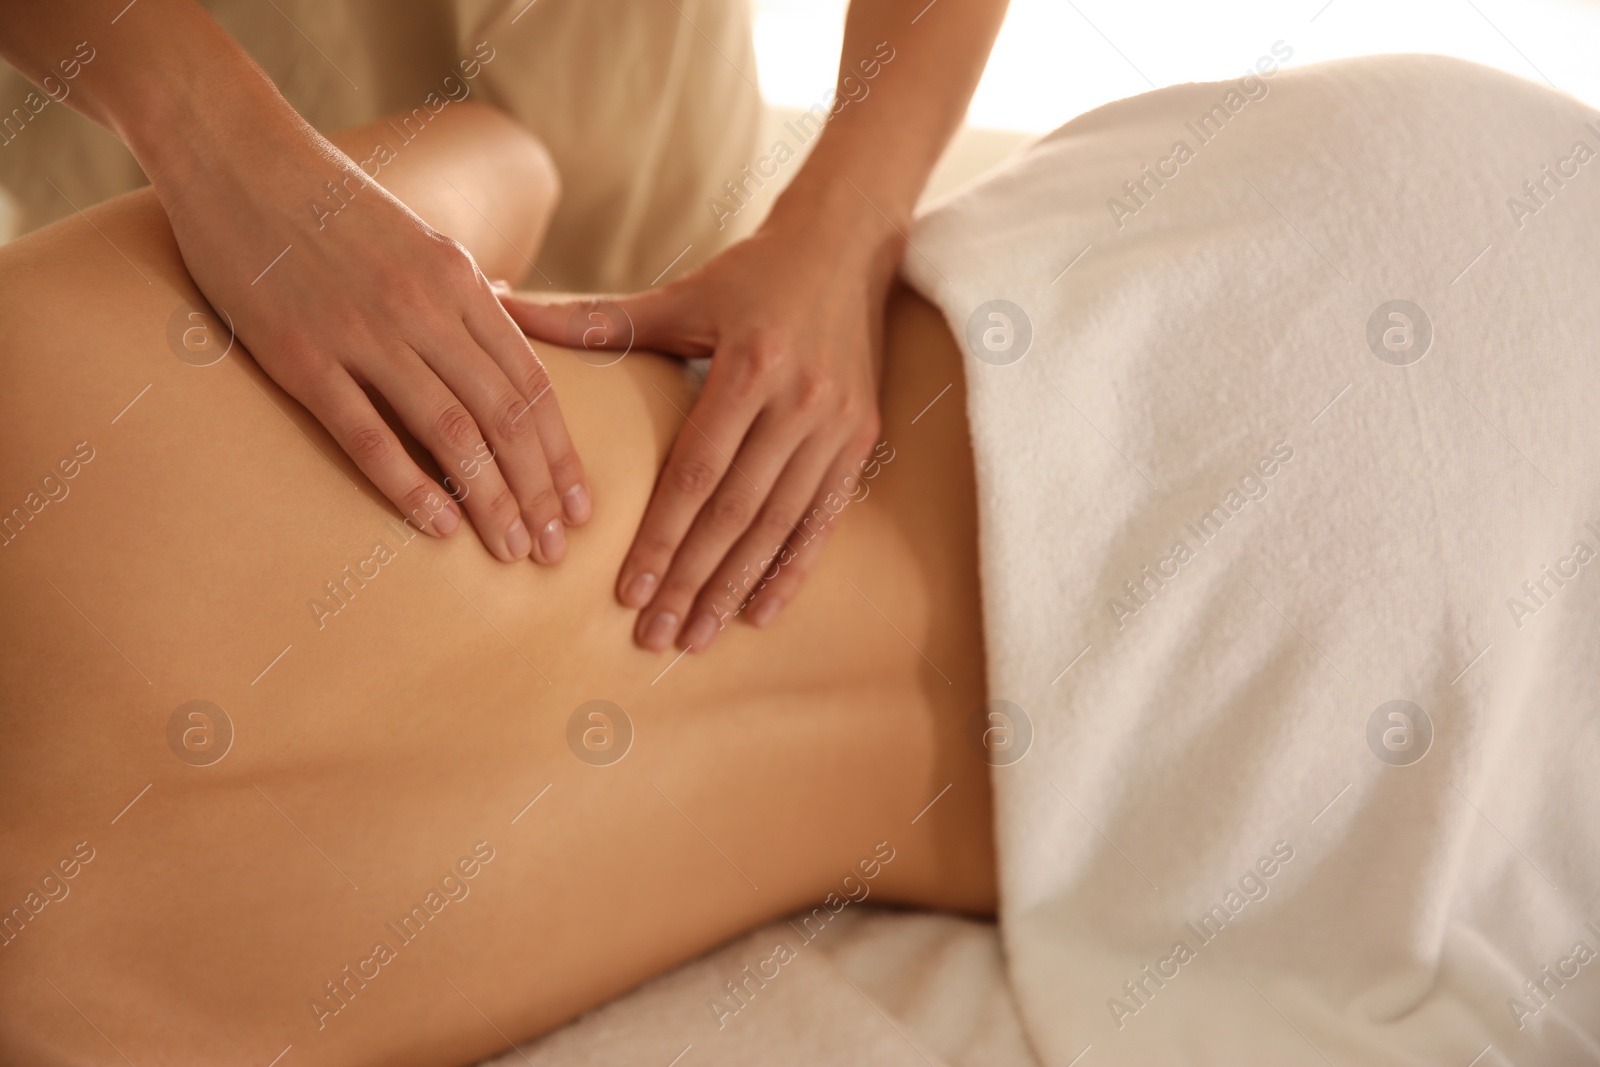 Photo of Young woman receiving back massage in spa salon, closeup